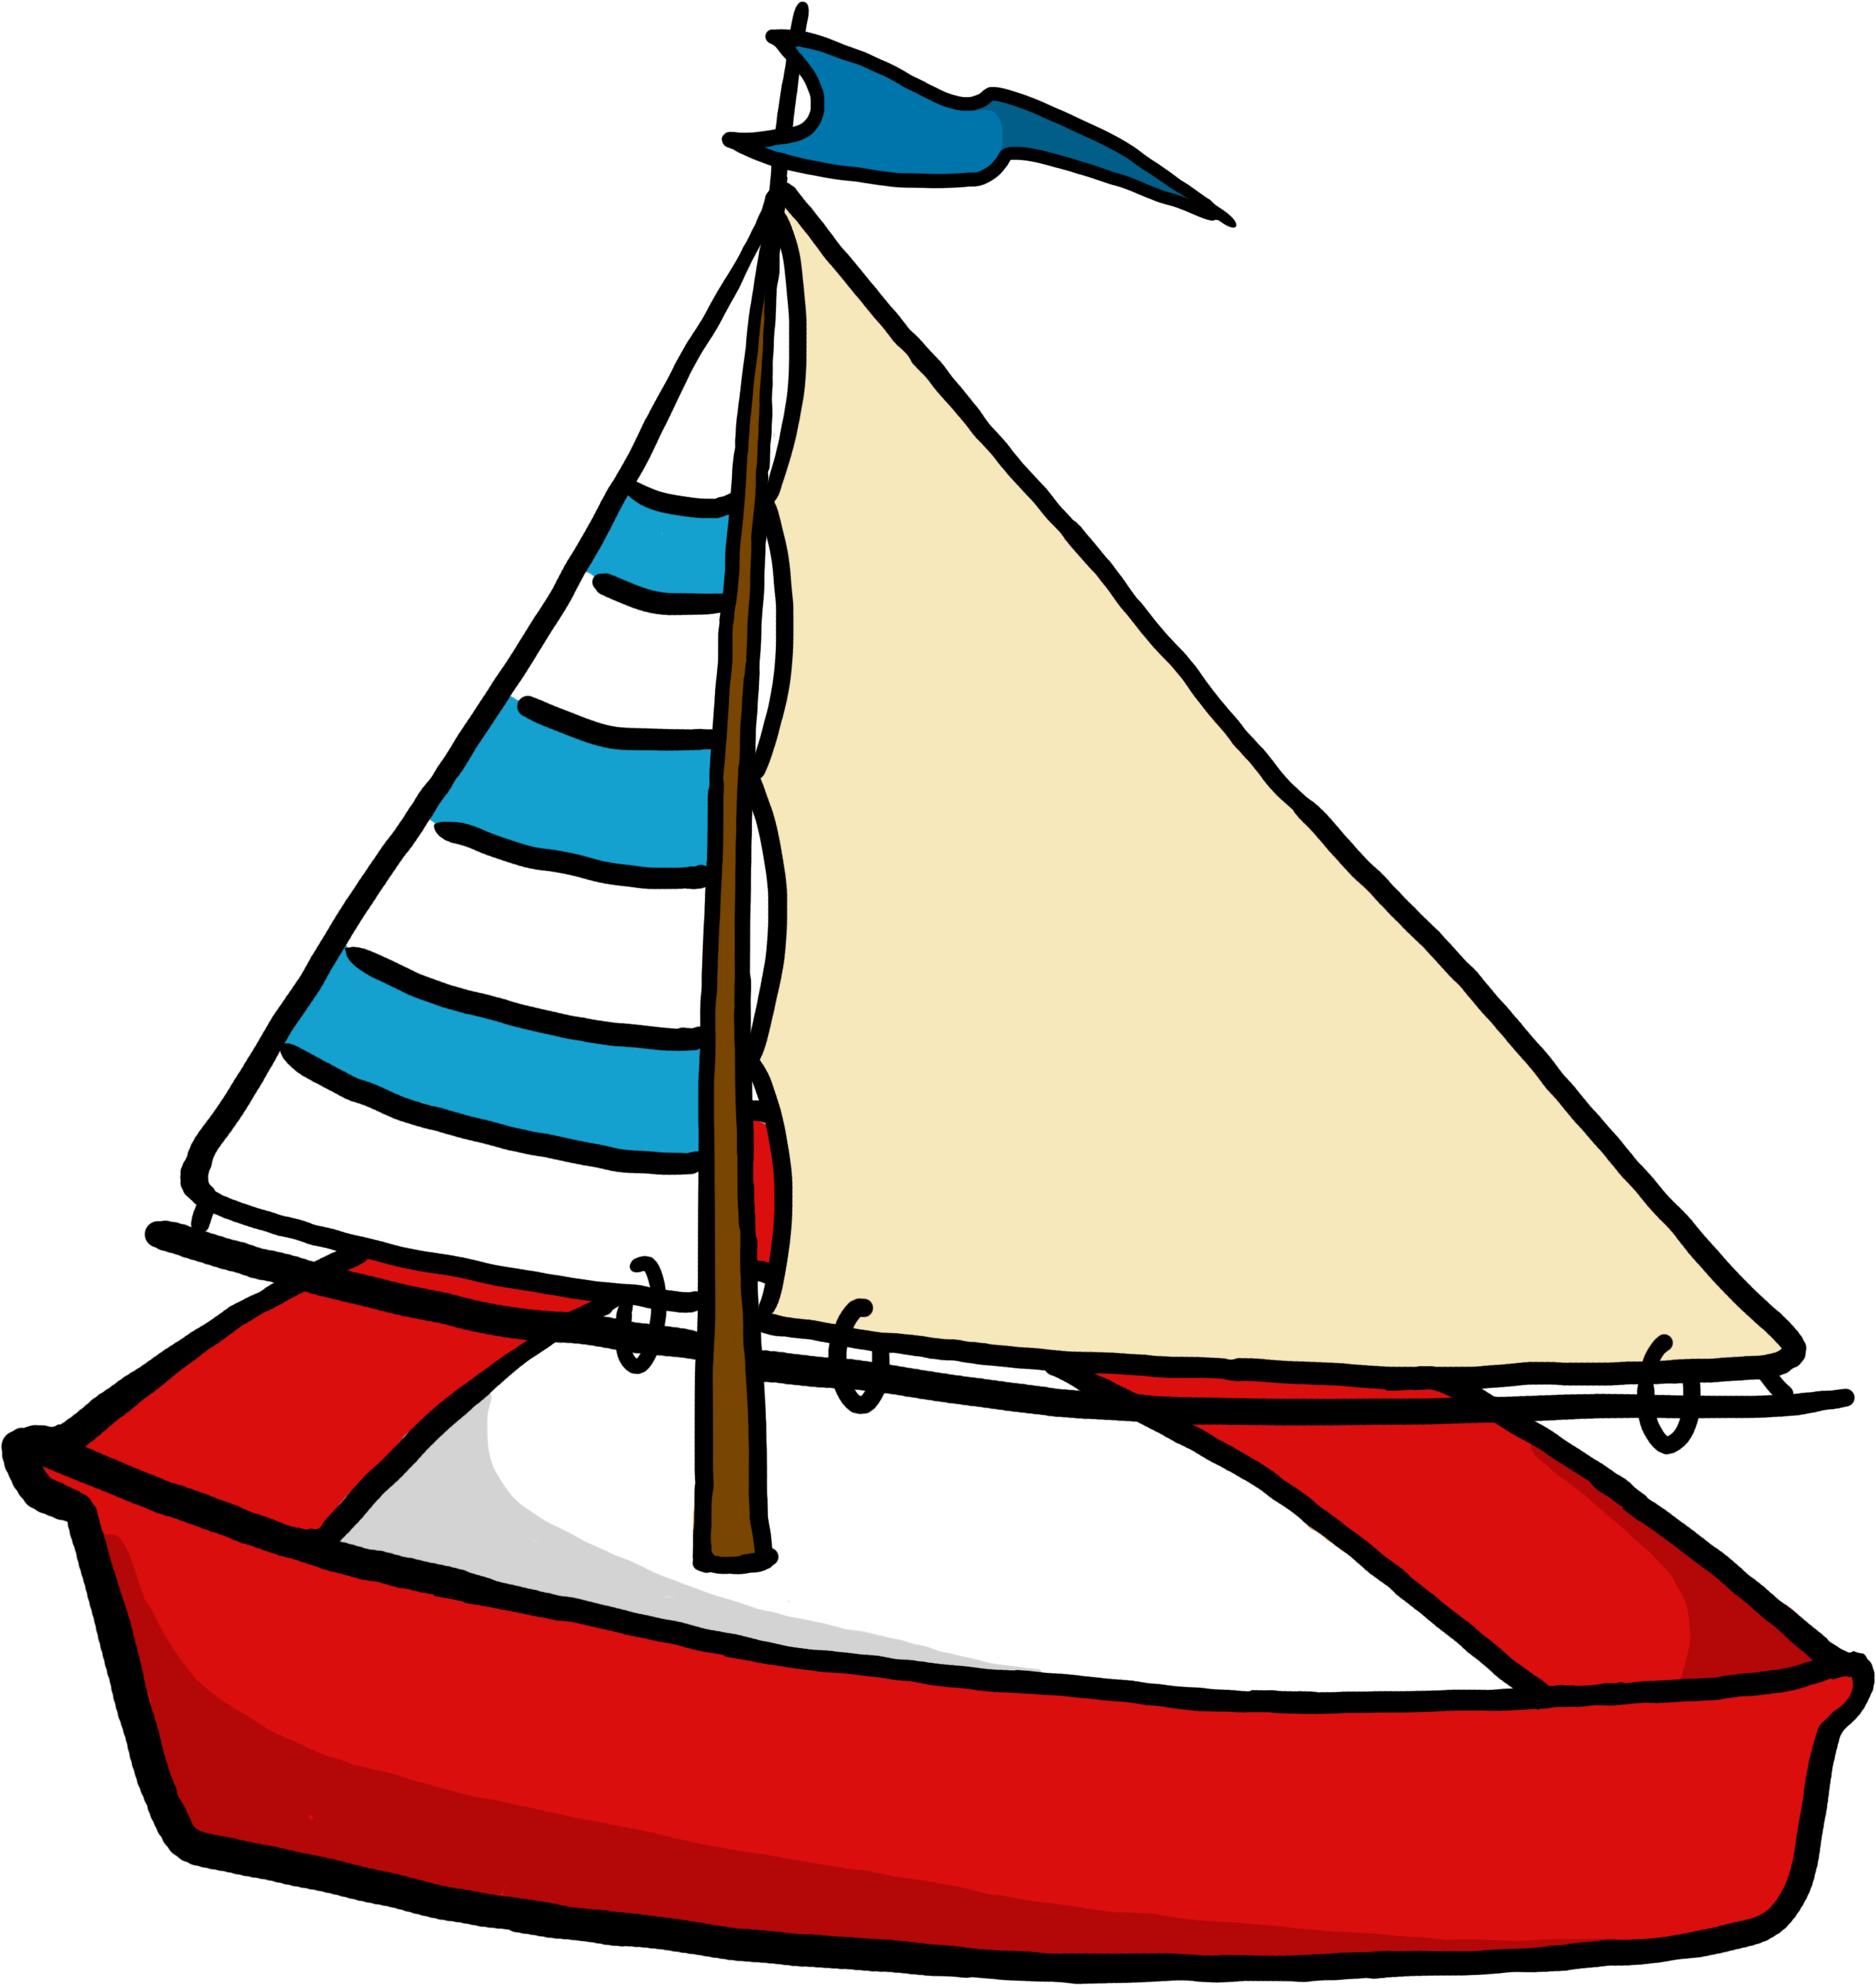 Free Boat Background Cliparts, Download Free Boat Background Cliparts